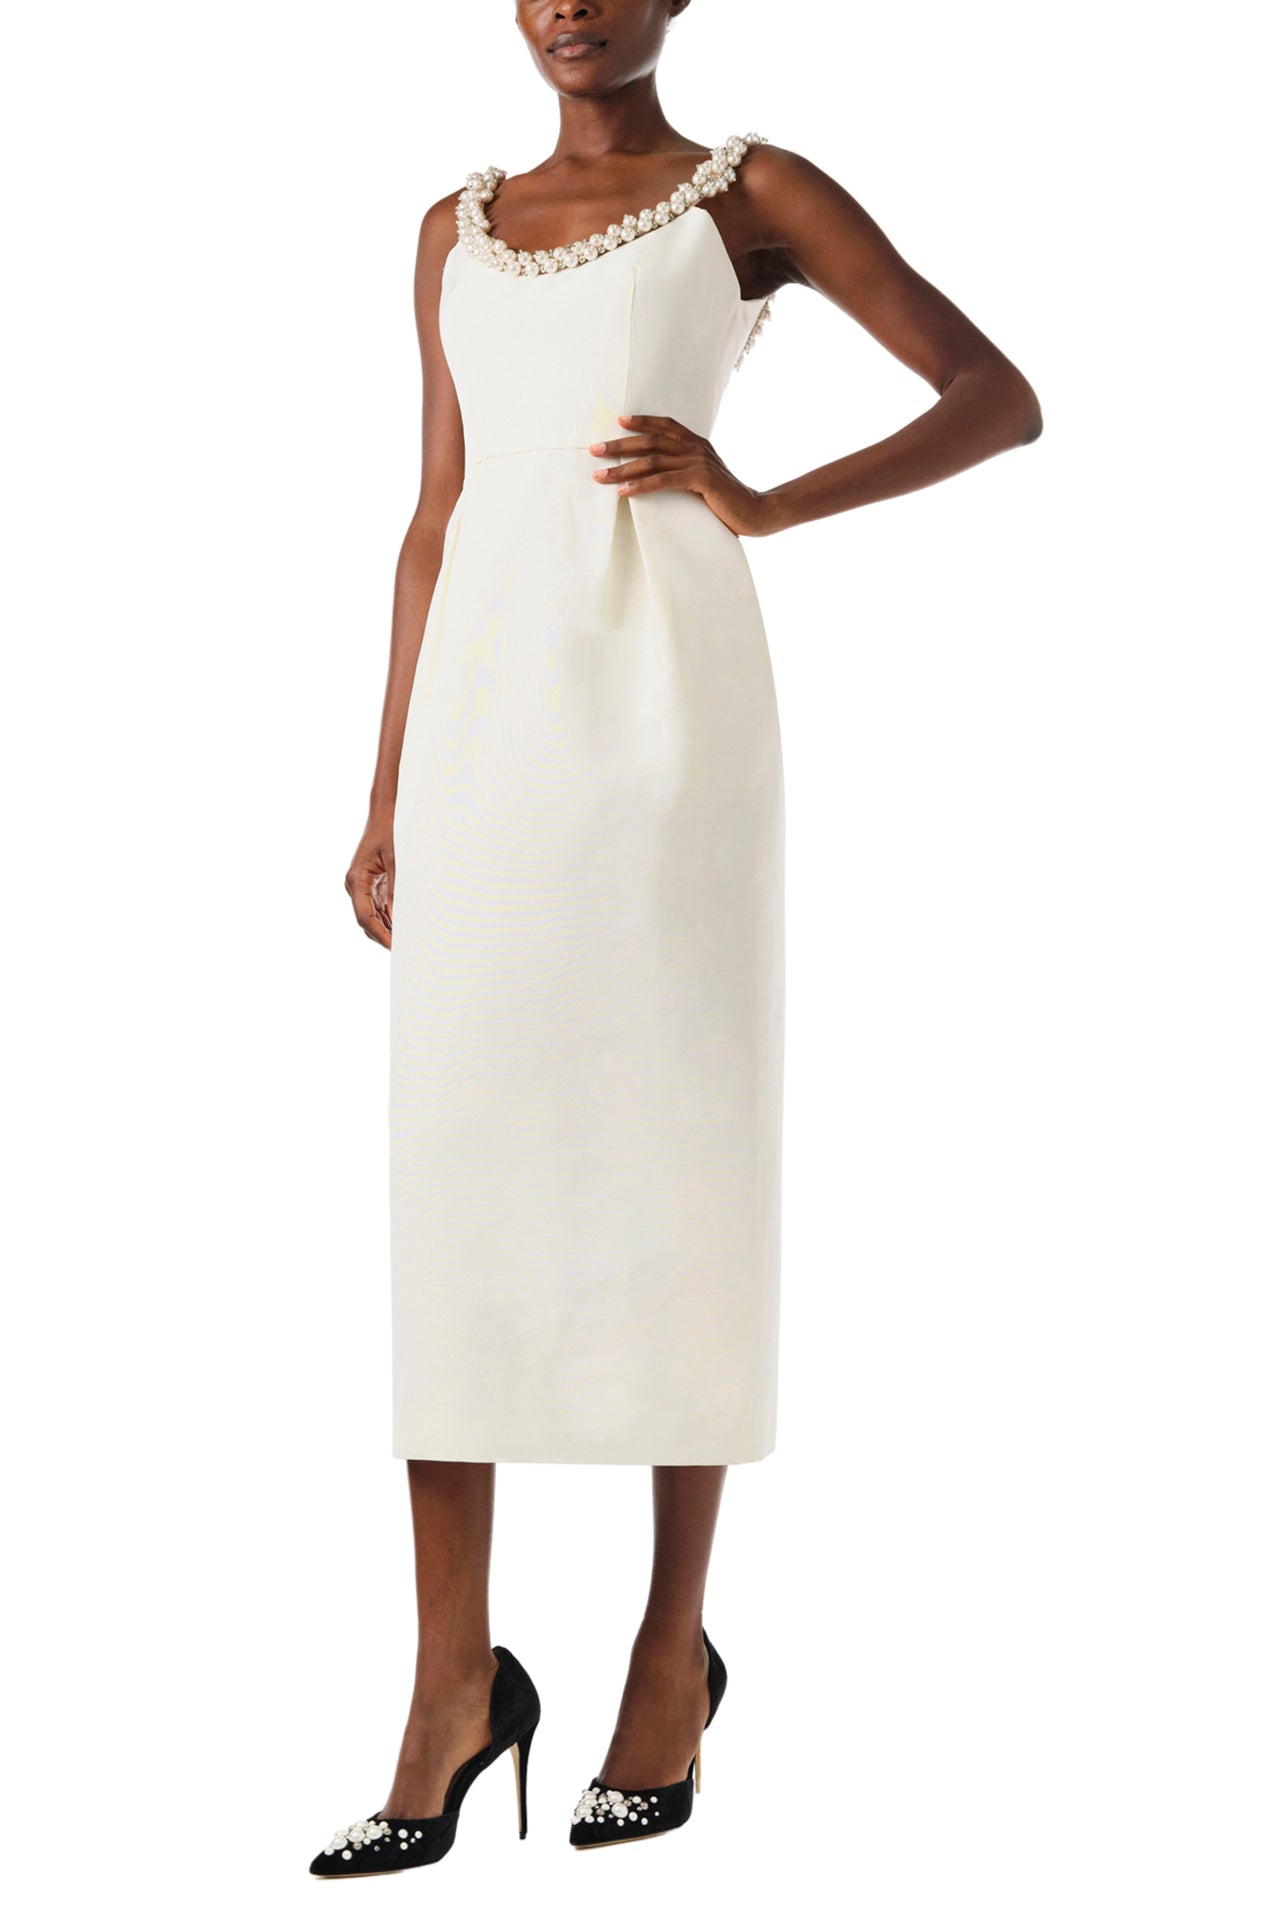 Monique Lhuillier Fall 2024 sleeveless, scoop neck cocktail dress with pearl embroidered neckline, low back, pockets, and natural waist seam - left side.